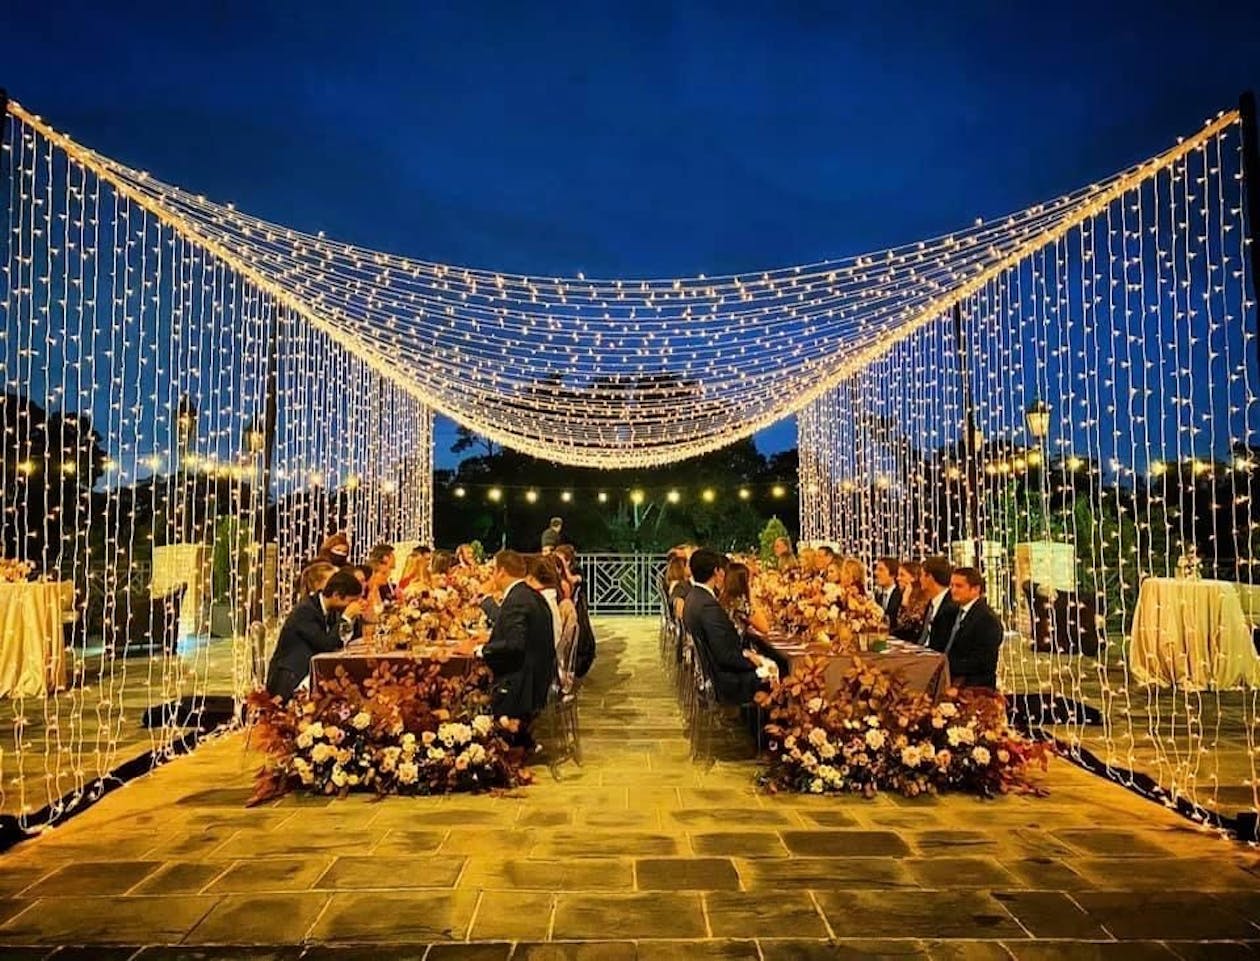 Two wedding receptions underneath twinkling light canopy at night | PartySlate